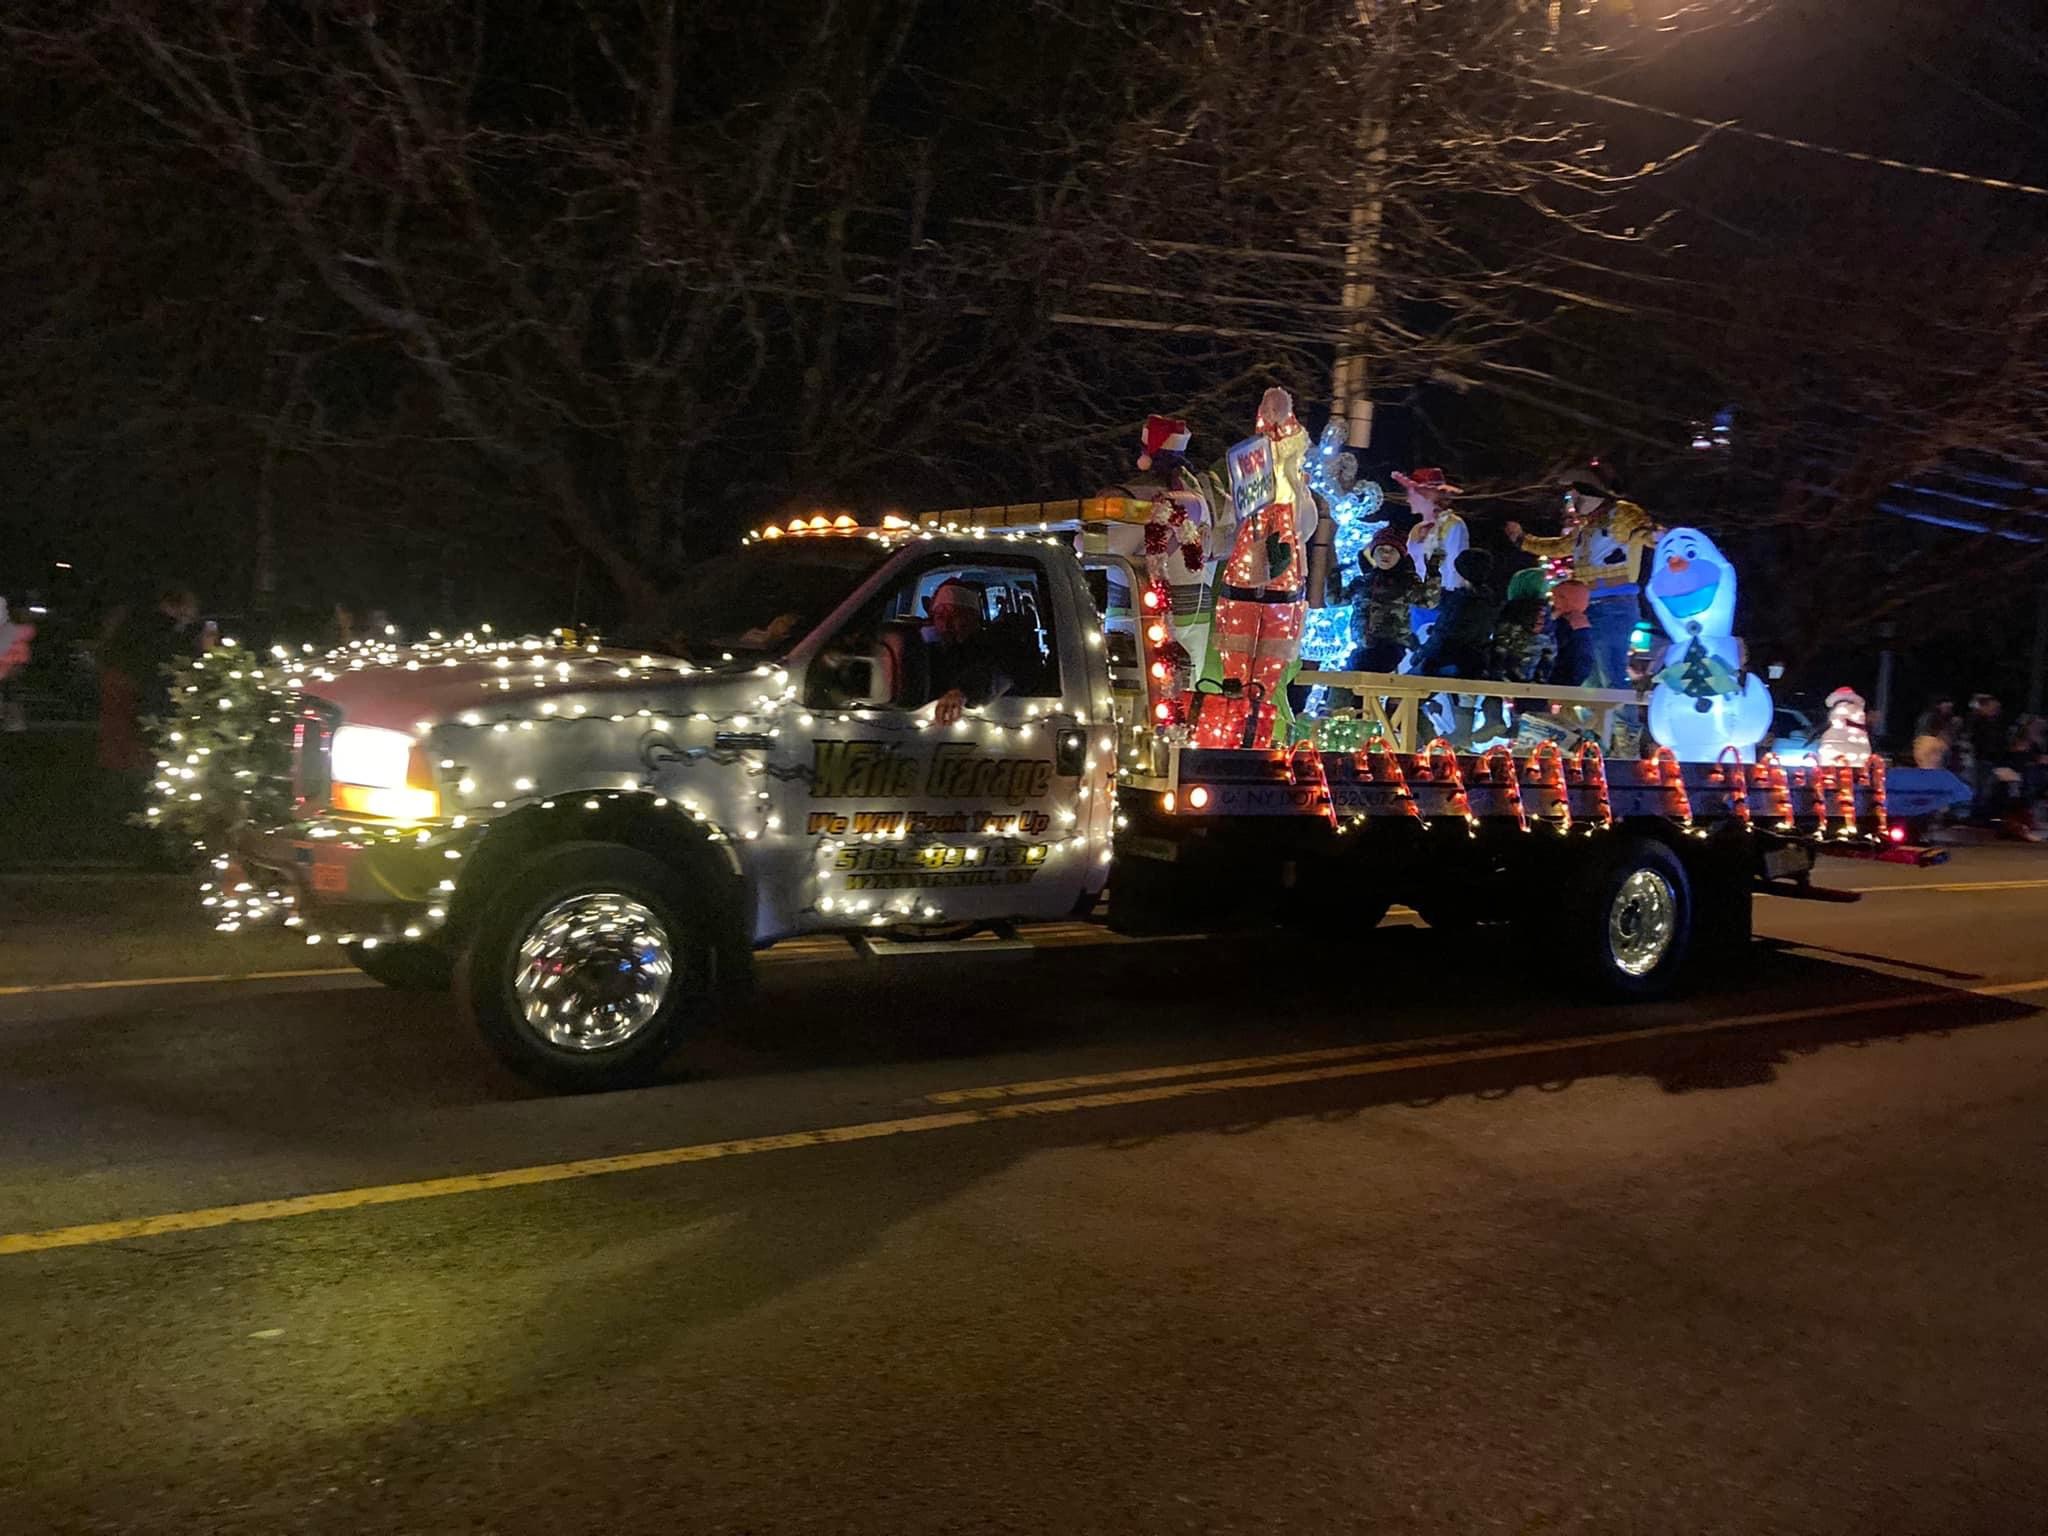 Truck decorated in Christmas lights